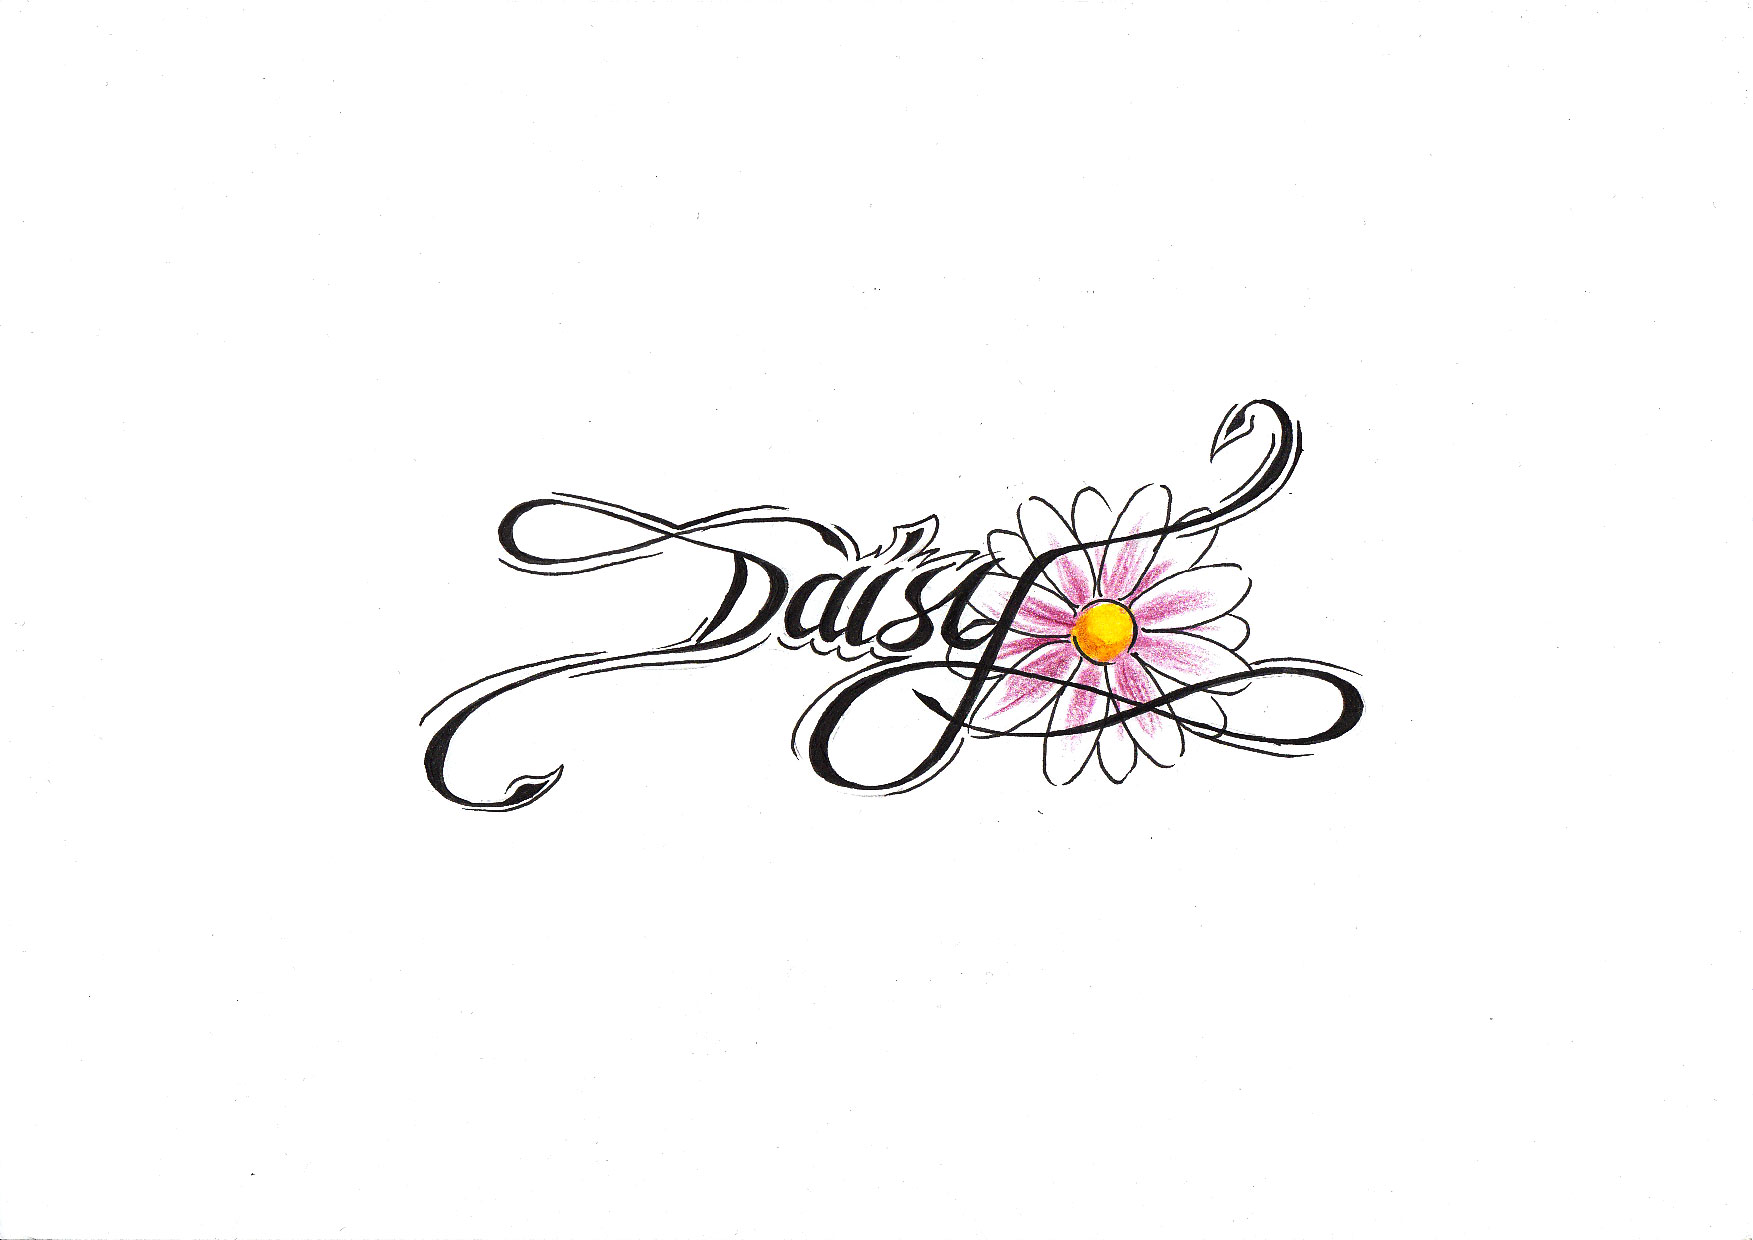 Pictures+of+daisies+tattoos